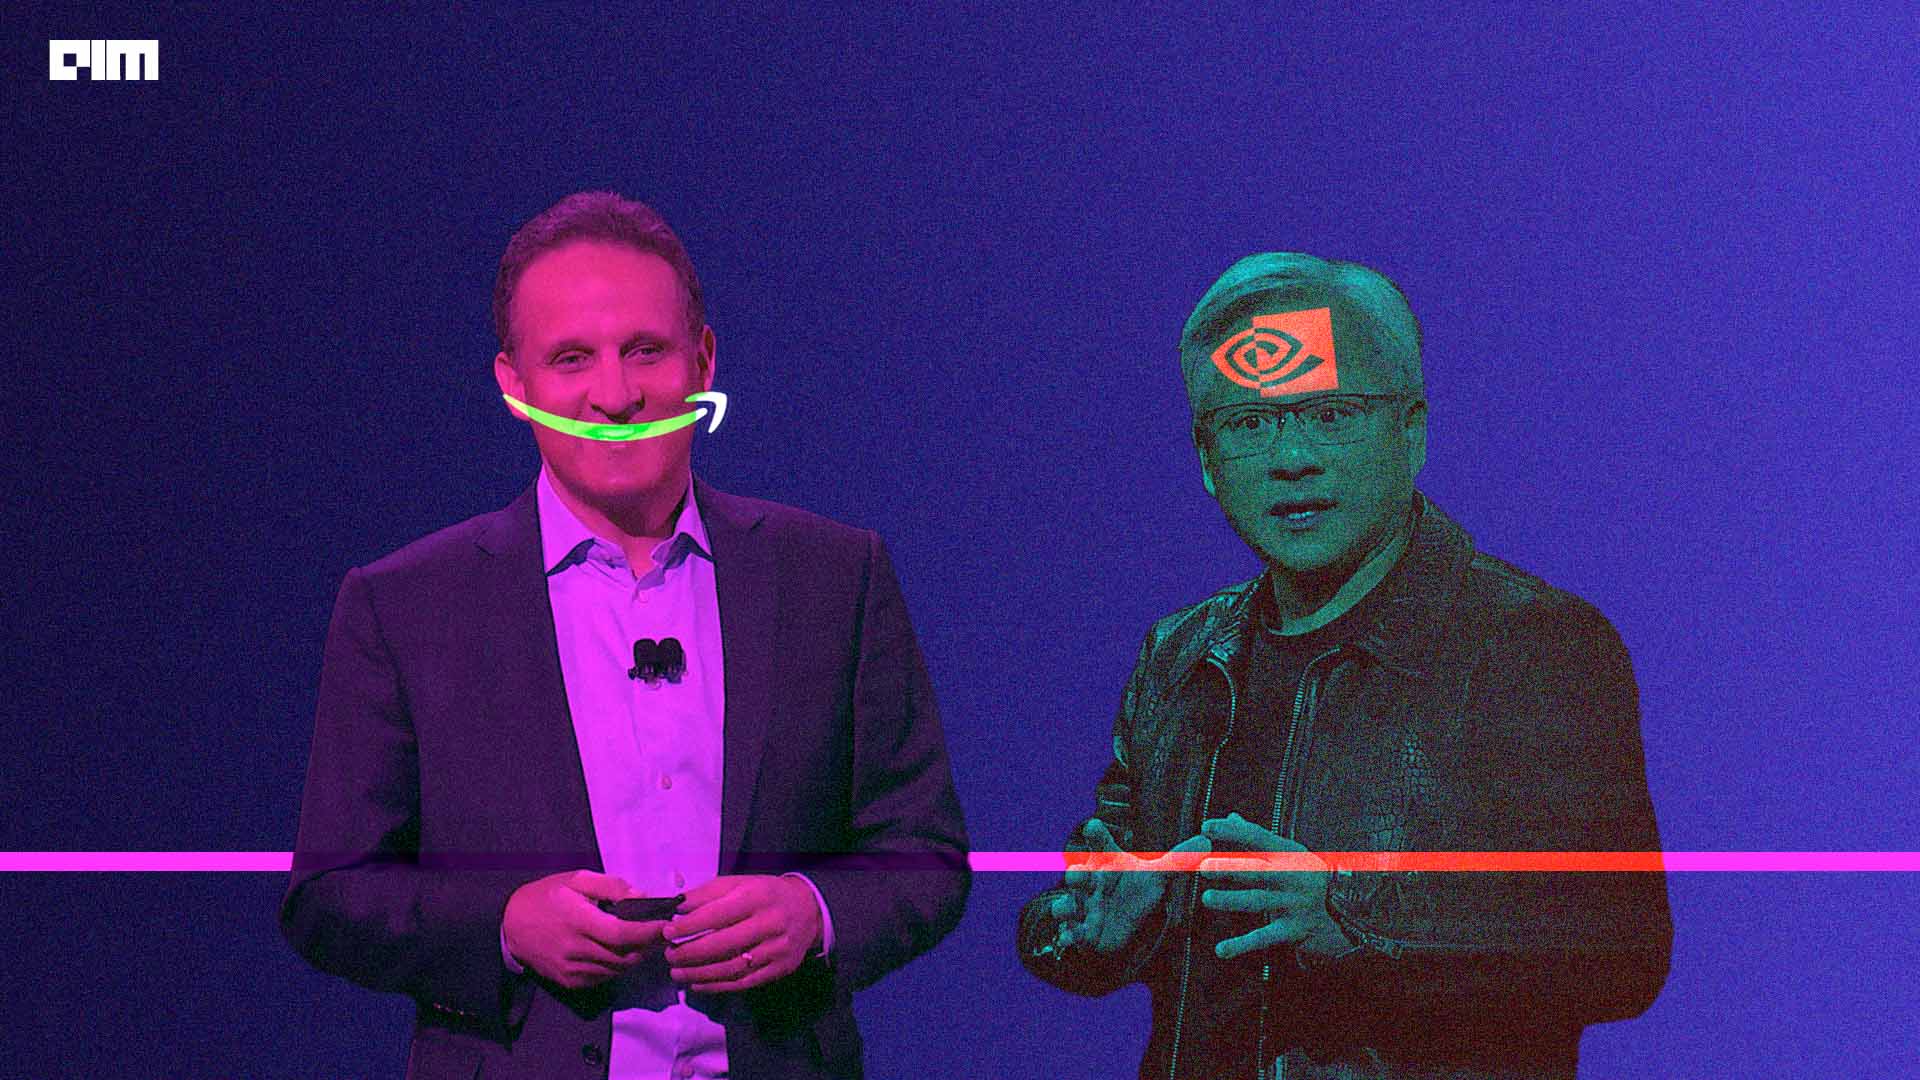 Jensen Huang Brings re:Invent to Life